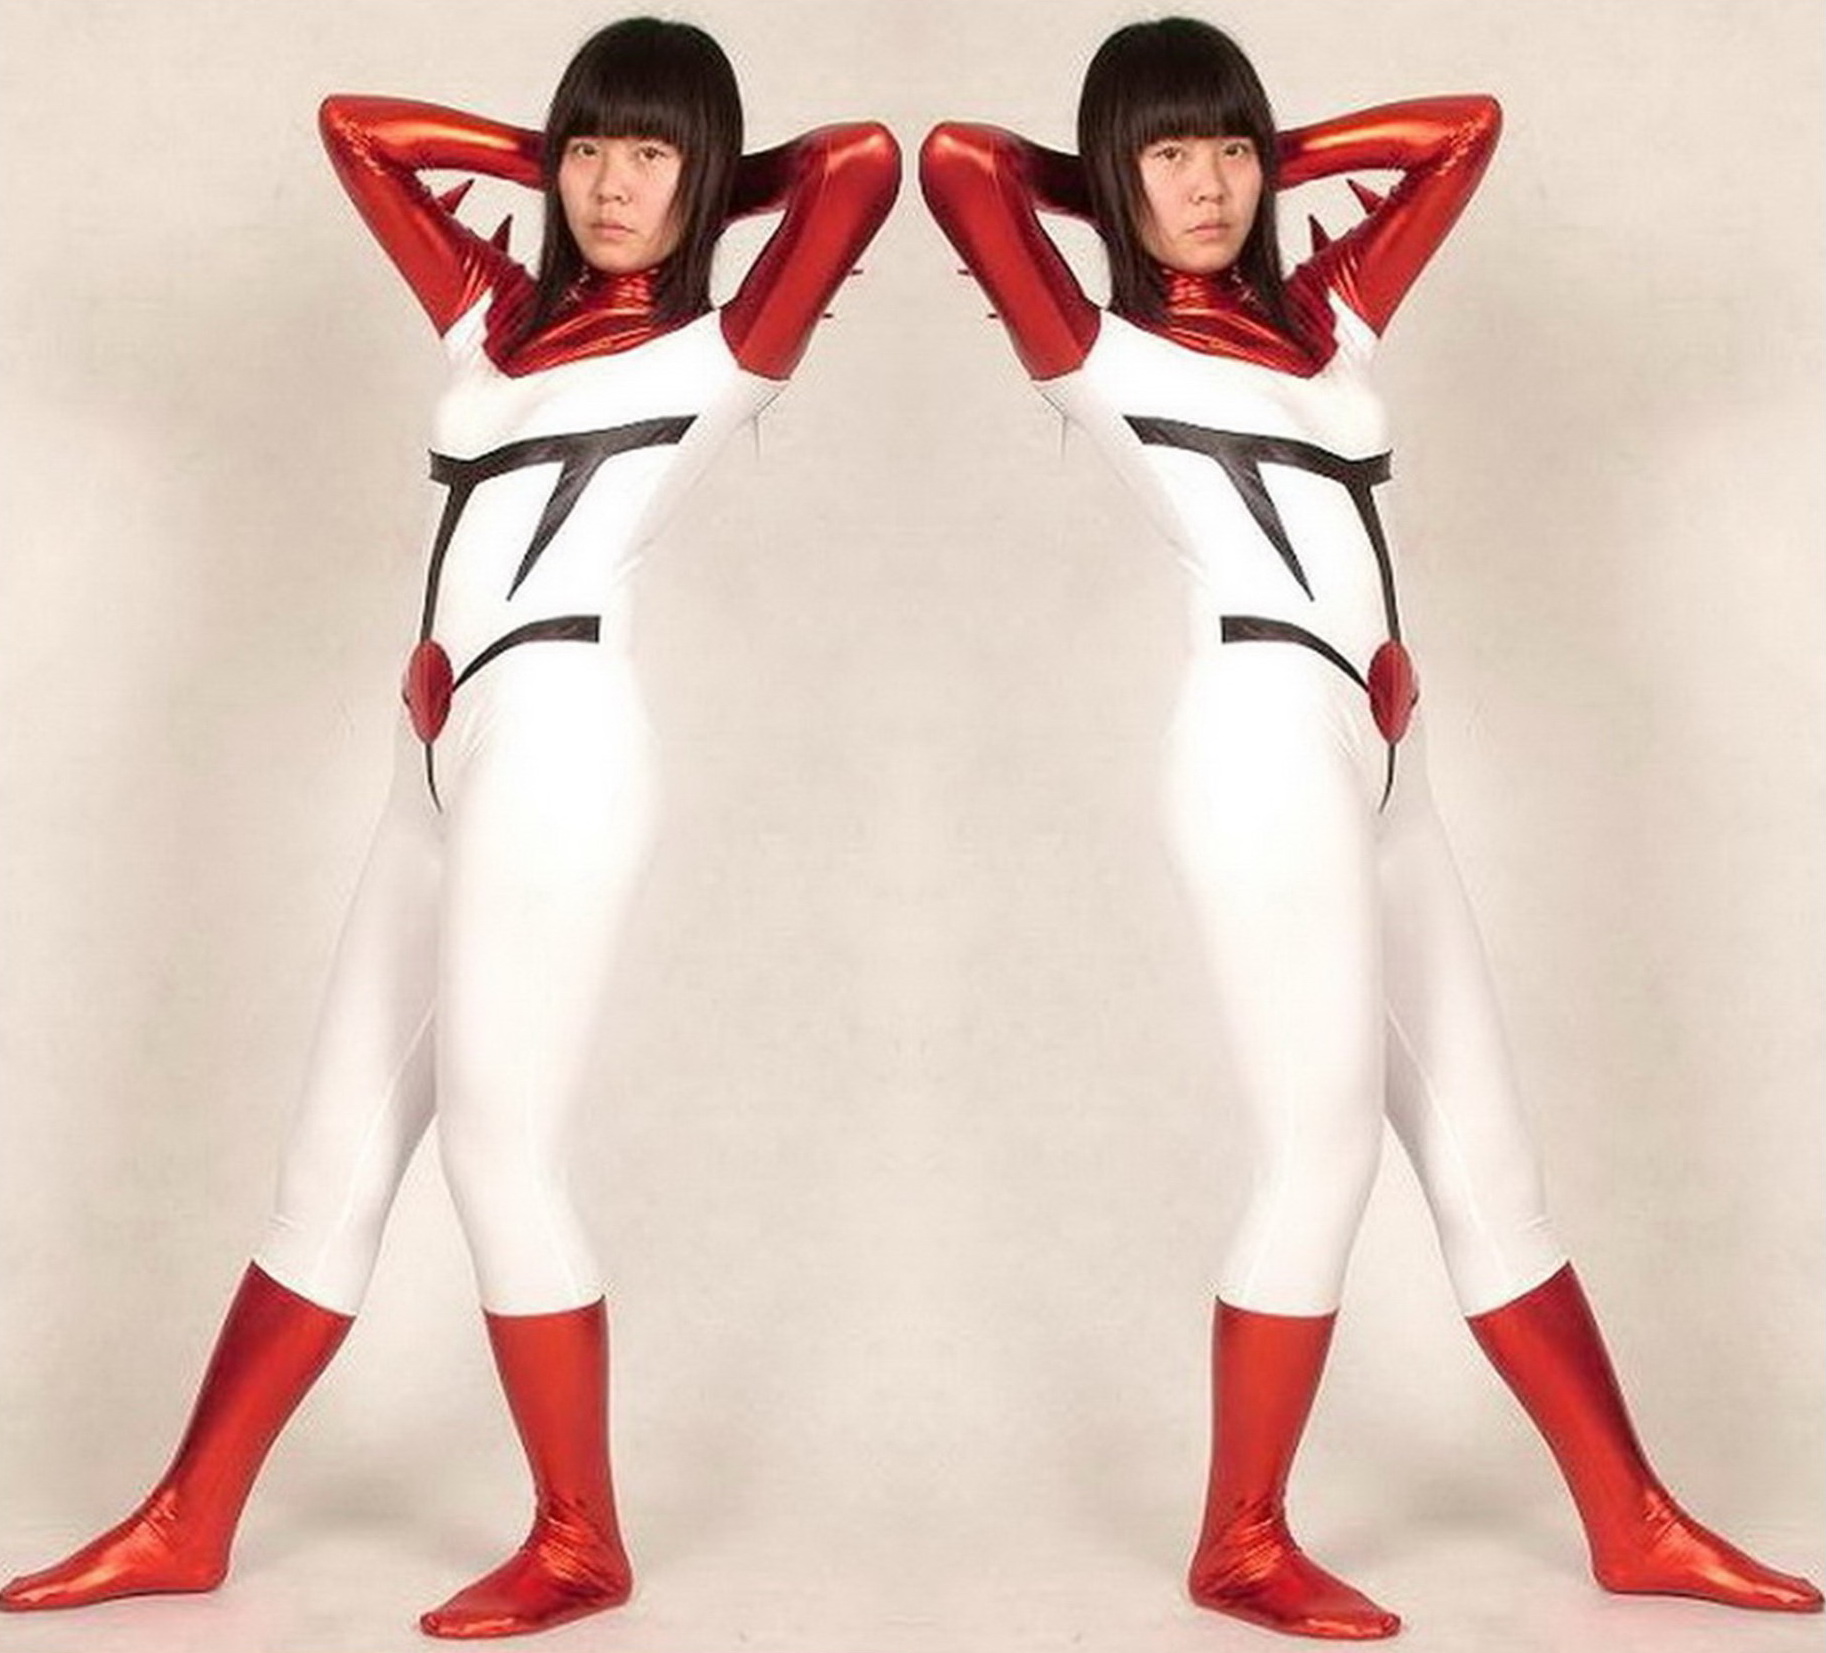 

Red/White Shiny Lycra Metallic Cardcaptor Sakura Catsuit Costume Sexy Women Tights Body Suit Costumes Outfit Halloween Party Fancy Dress Cosplay Bodysuit P260